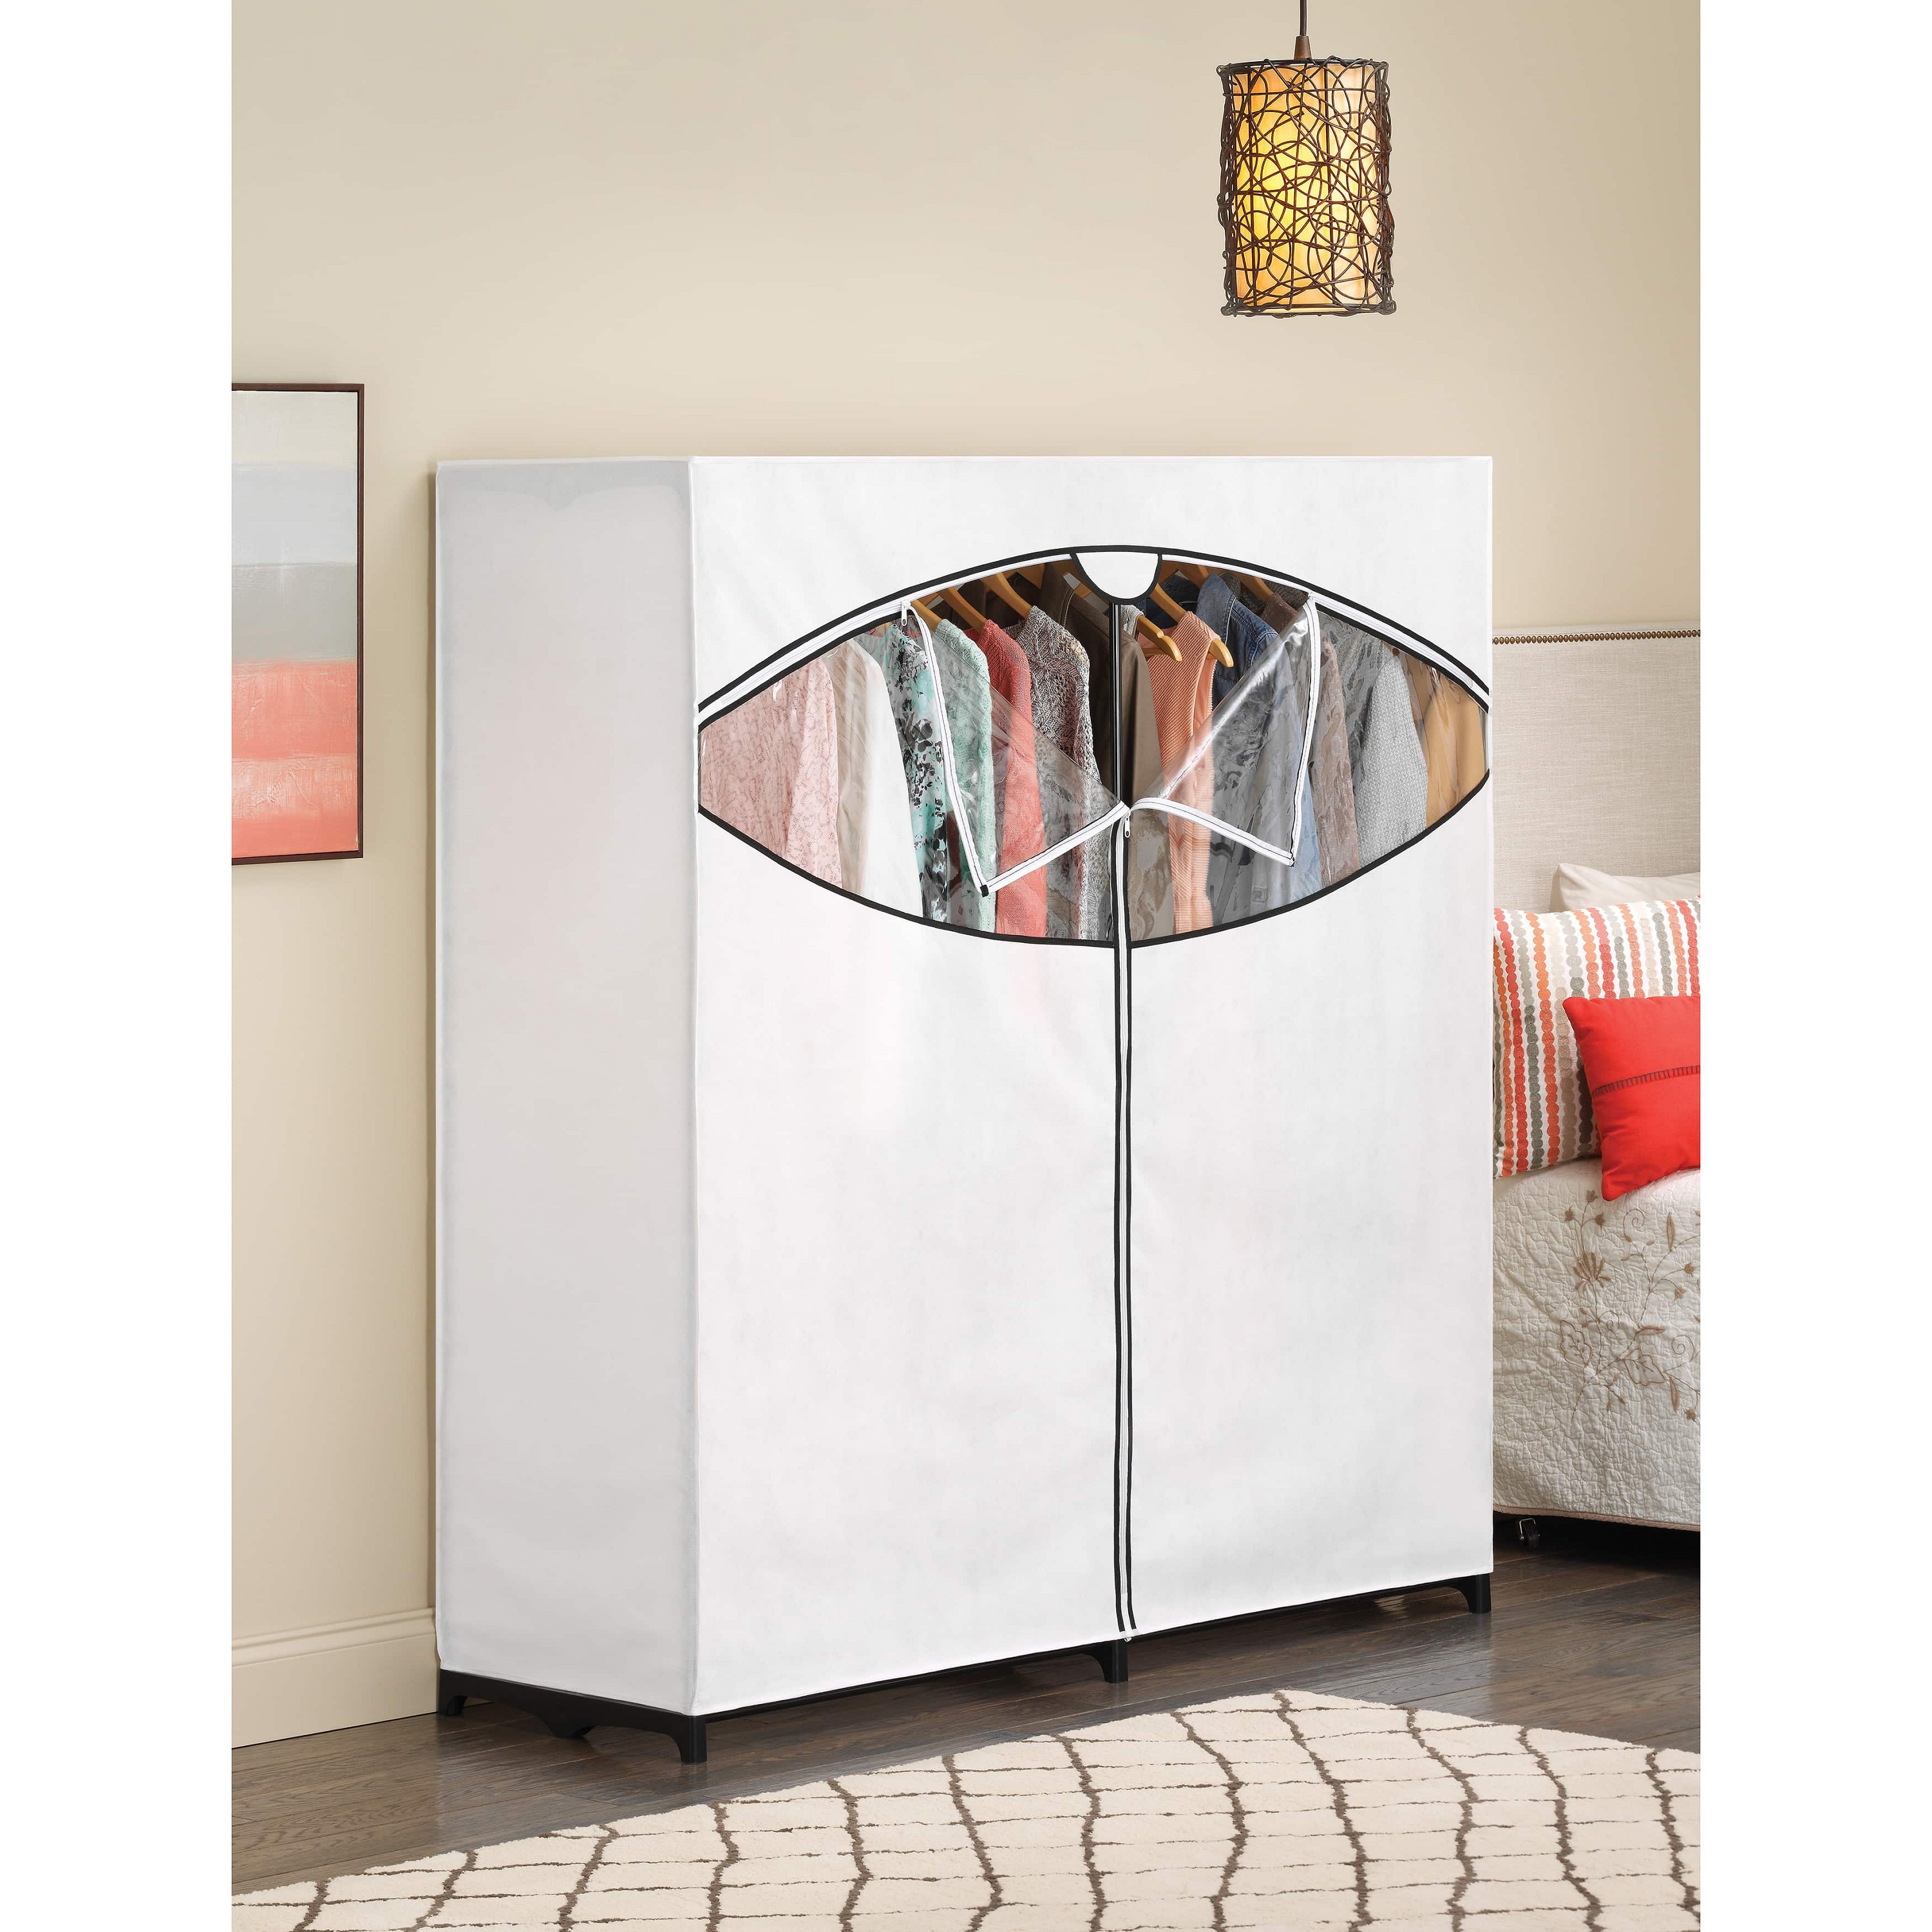 Whitmor Extra-Wide 60-inch Polypropylene Clothes Closet with White Cover - image 5 of 5